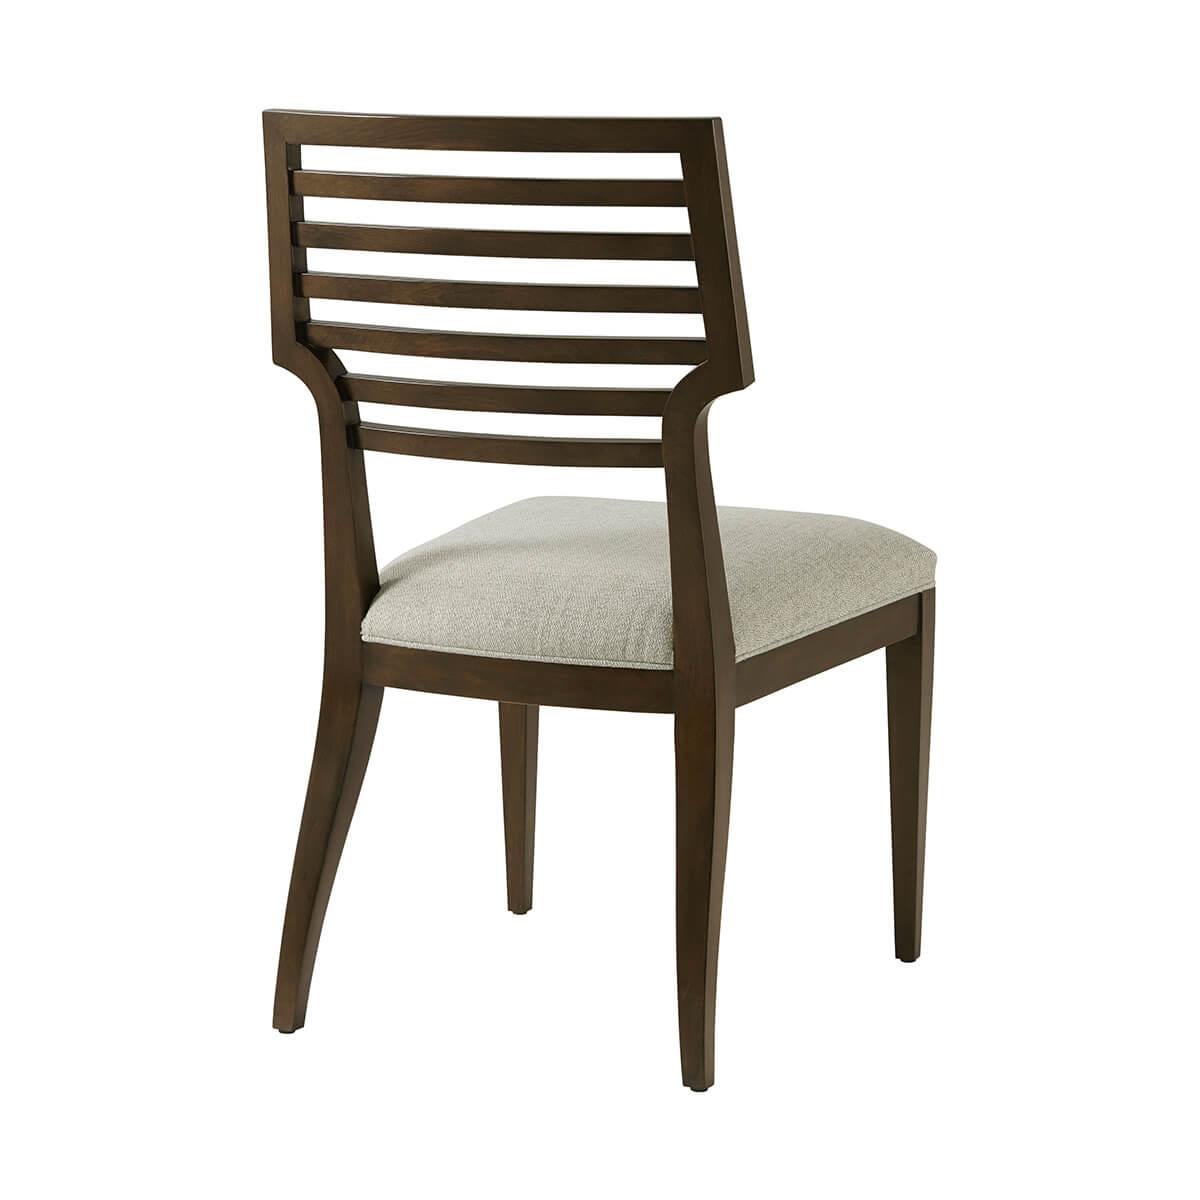 Crafted from Prima Vera in our Bistre finish, featuring a sophisticated horizontally slatted back, and a padded cushion upholstered with neutral performance fabric, all raised on square tapered legs.

Dimensions: 20